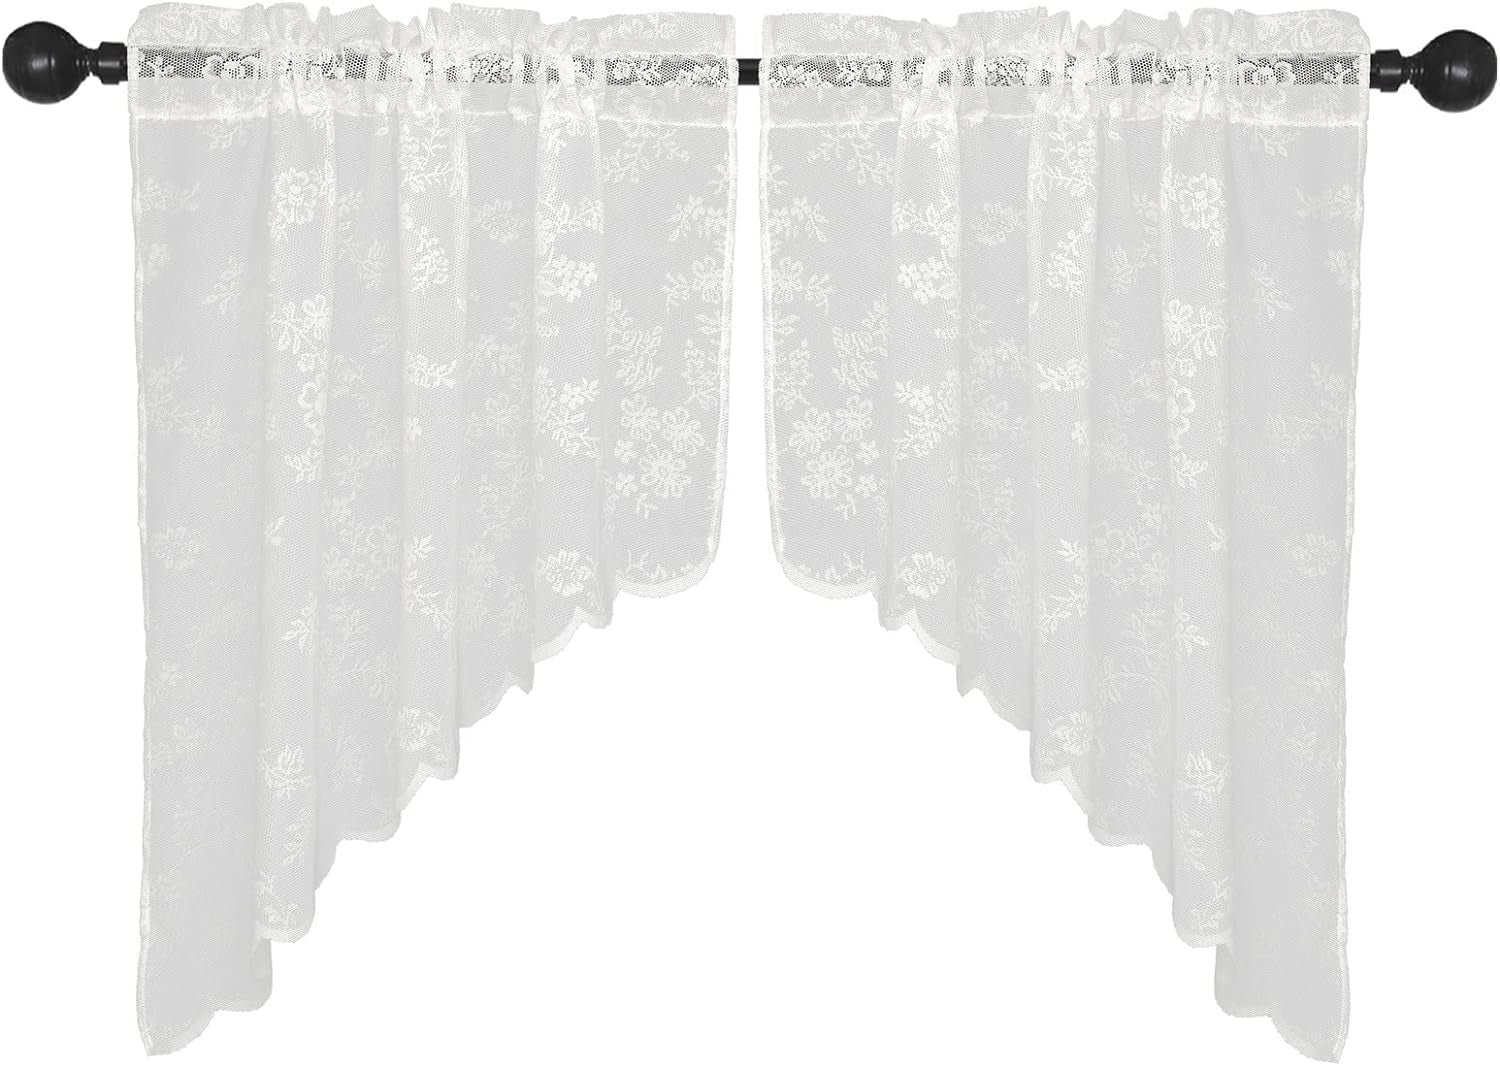 2 Pcs Floral Sheer Swag Curtains 36 Inches Length Rod Pocket Half Small Cafe Window Curtains White Retro Lace Swag Valance Kitchen Curtains, 36X36 Inches